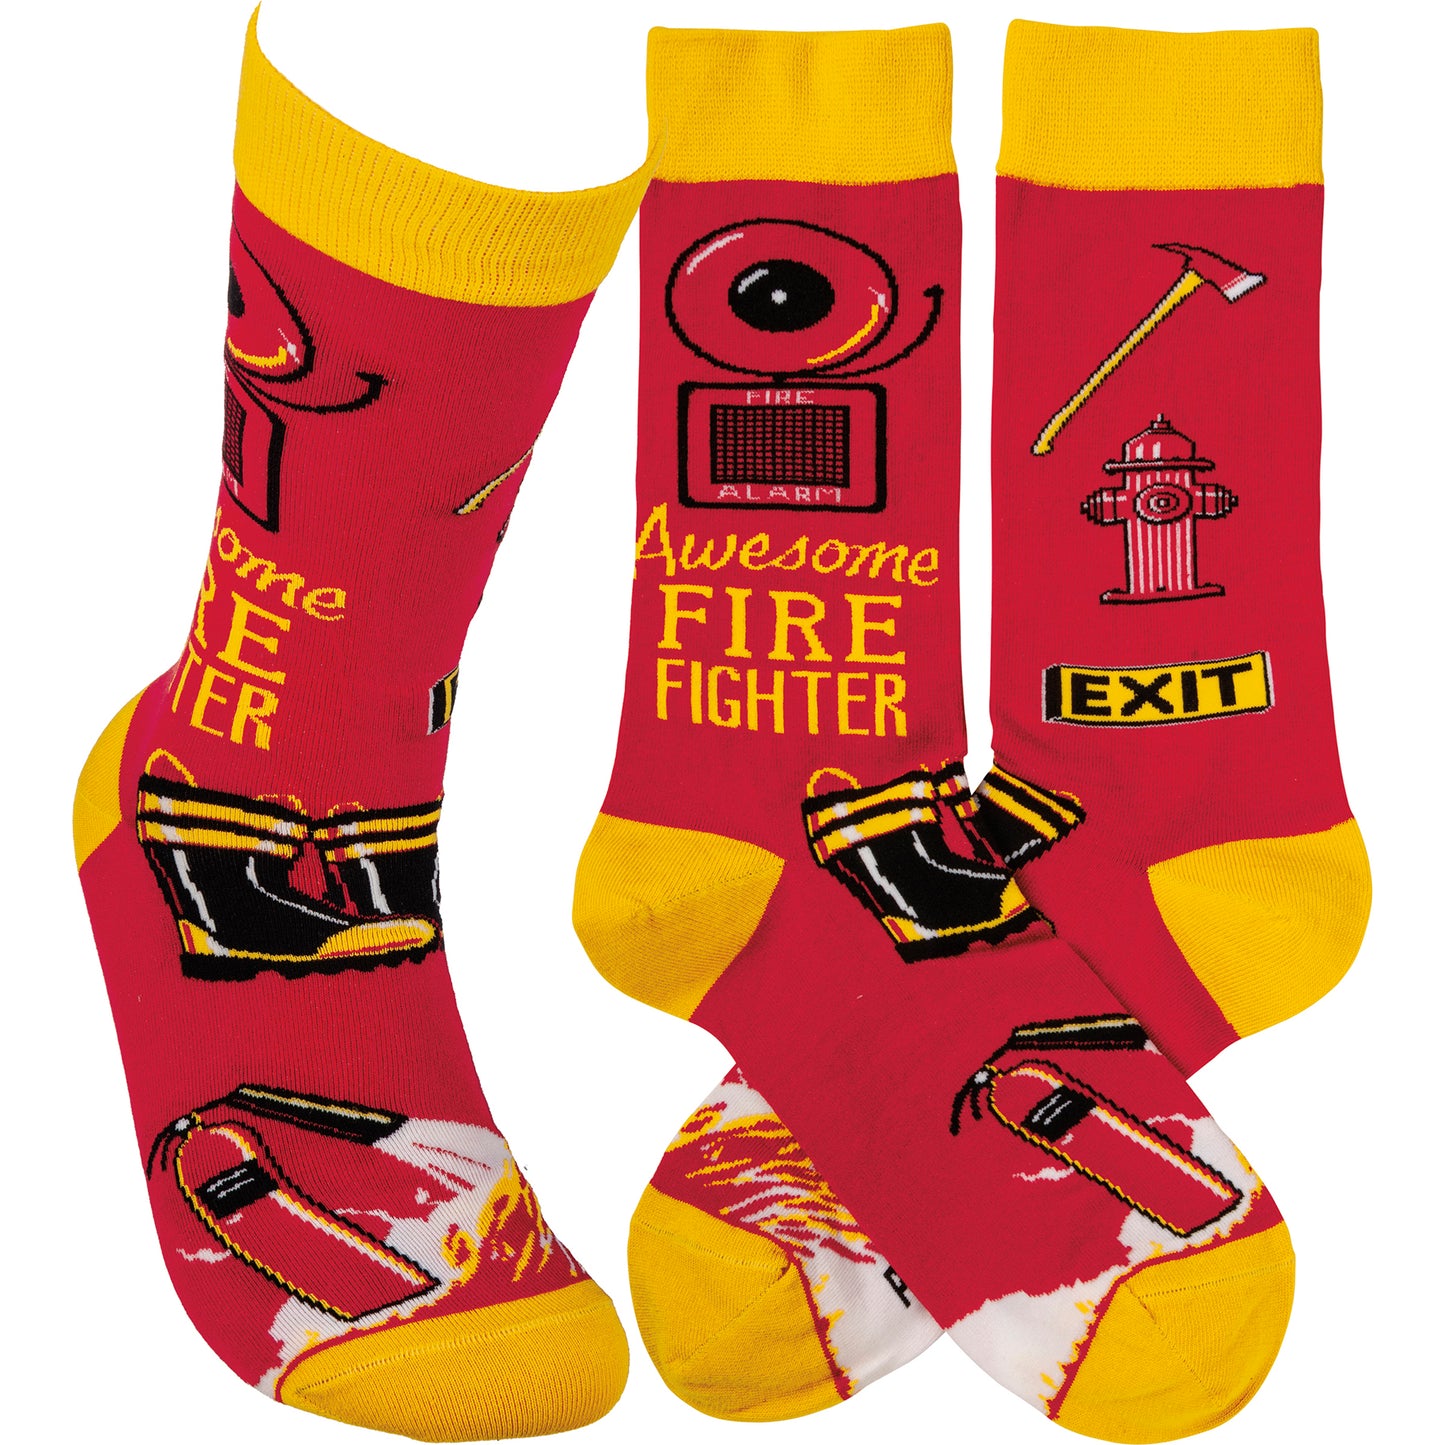 Socks Awesome Fire Fighter 109625